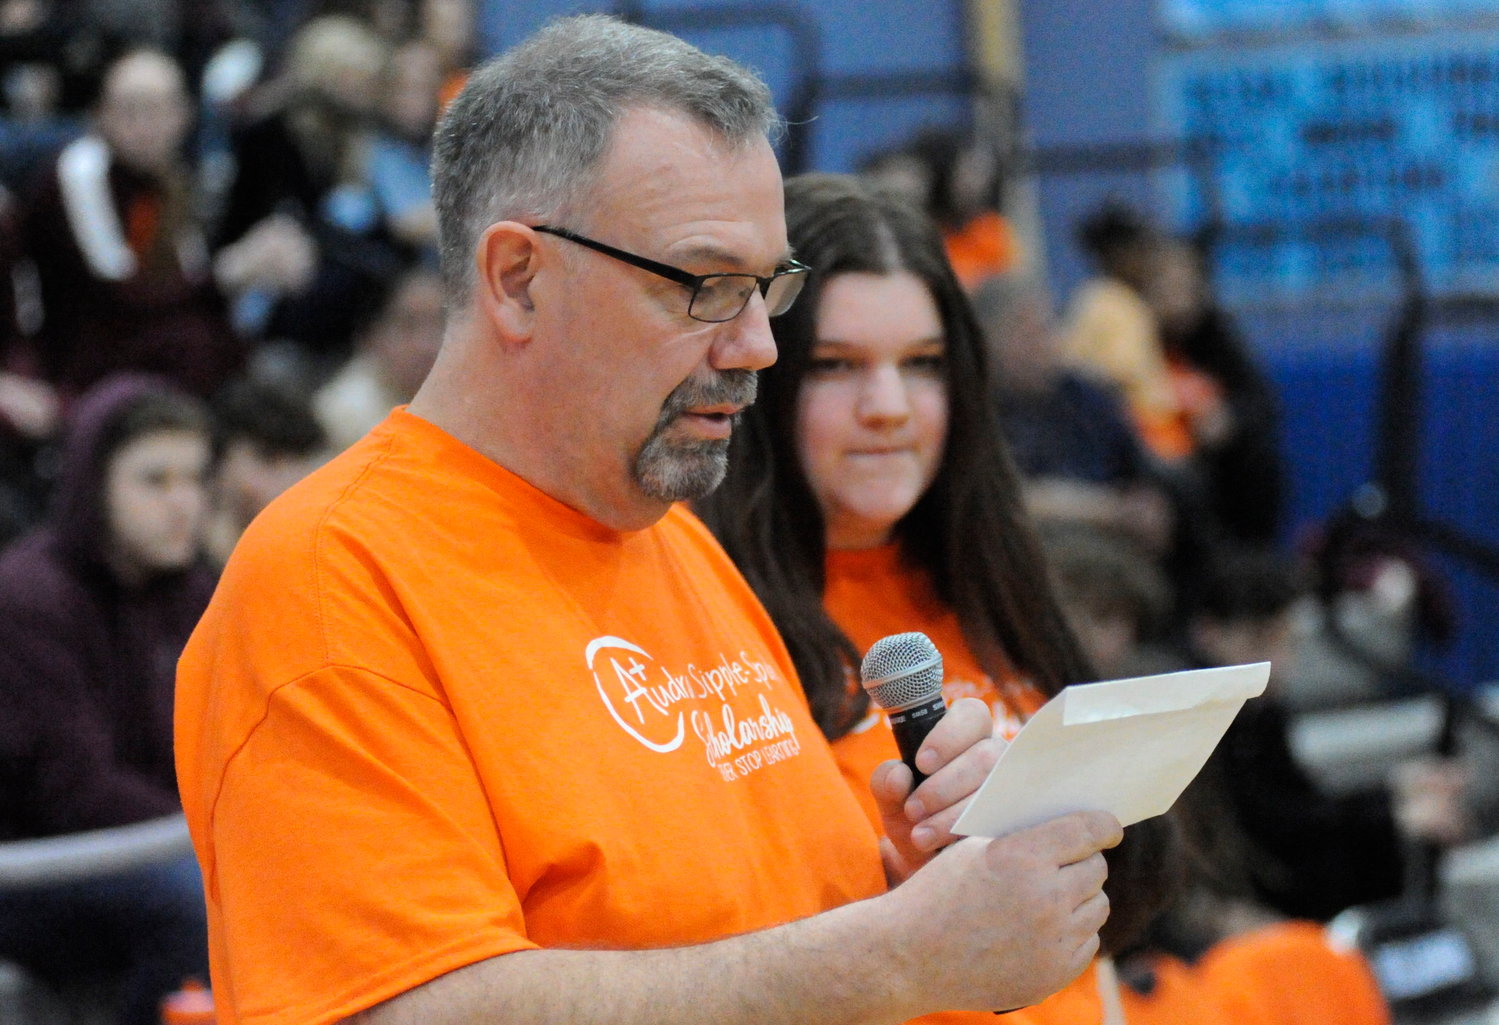 A moment of remembrance. John Spath addresses the packed gym, thanking the crowd for supporting the new Audra Sipple-Spath Scholarship Fund. He is pictured with his 21-year-old daughter Karlee, a 2019 graduate of Sullivan West.